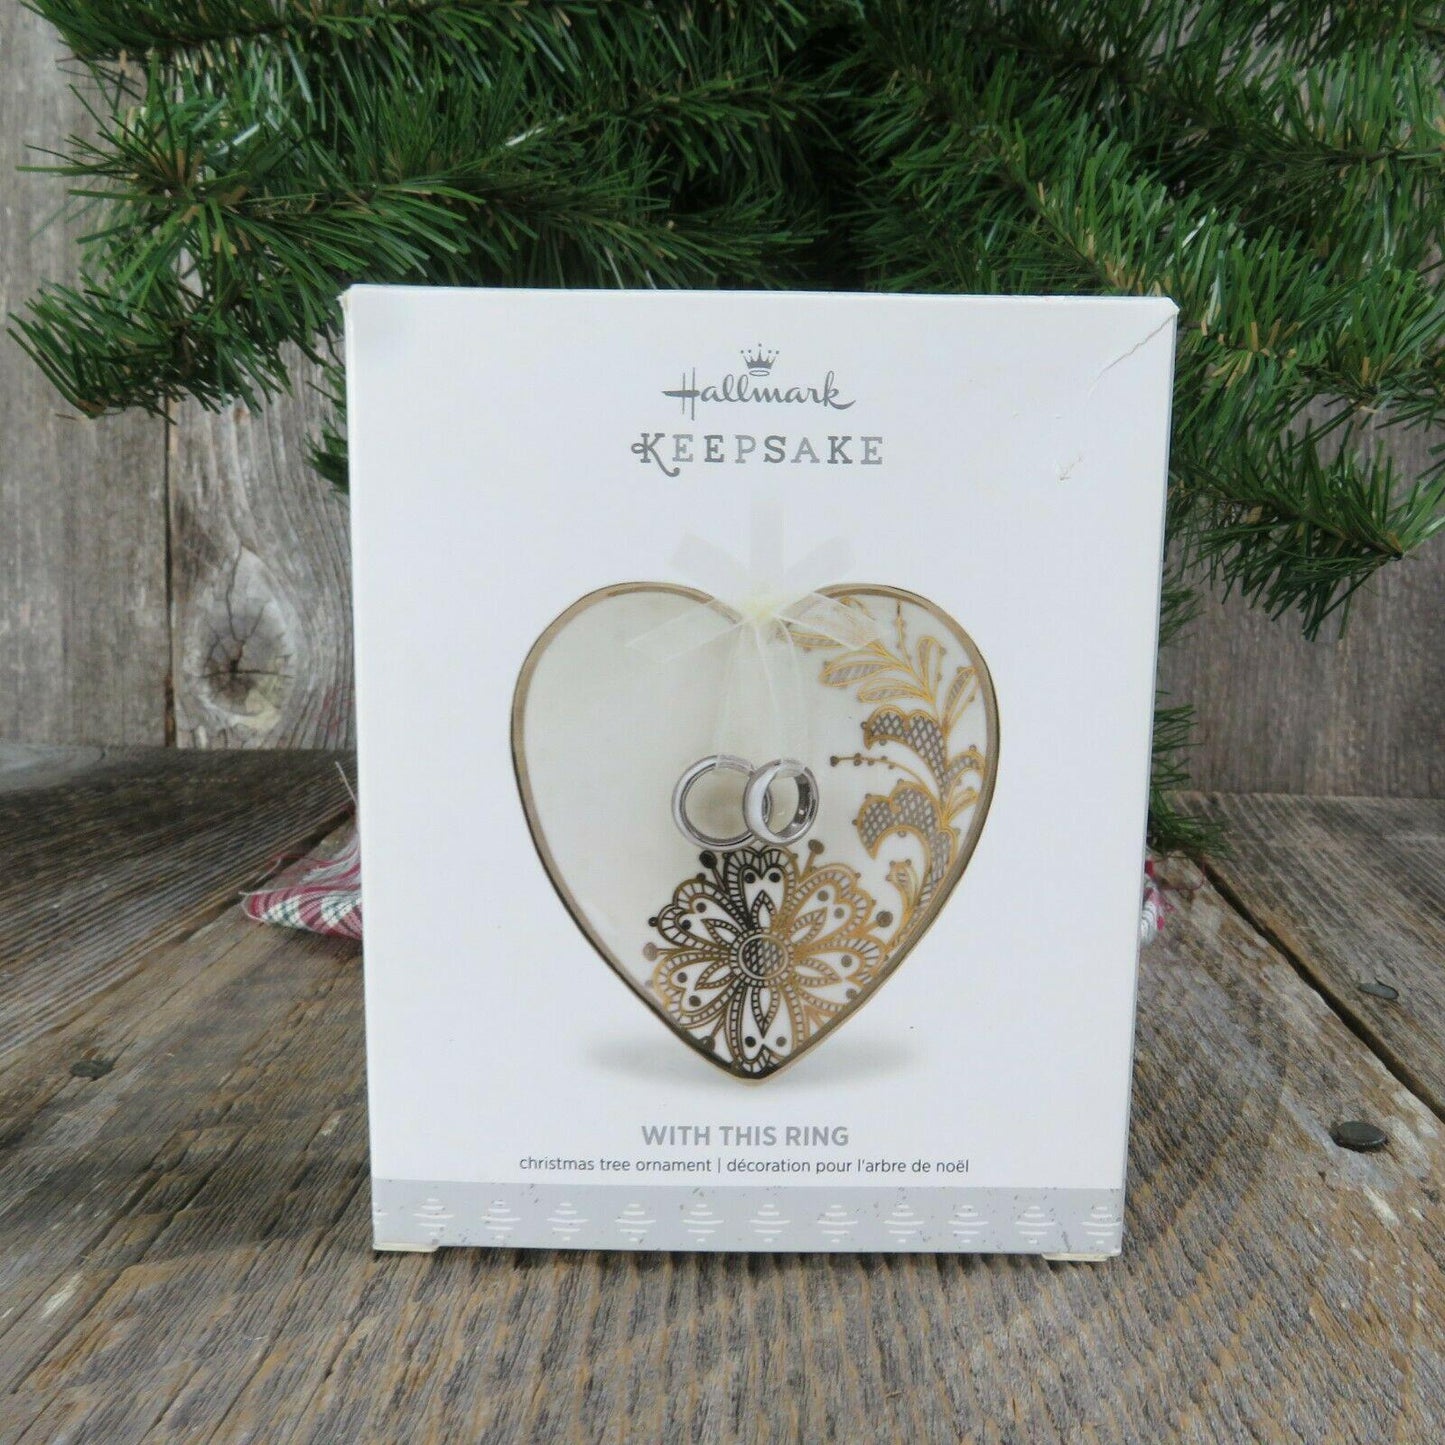 With This Ring Porcelain Heart Wedding Ornament Hallmark First Christmas 2017